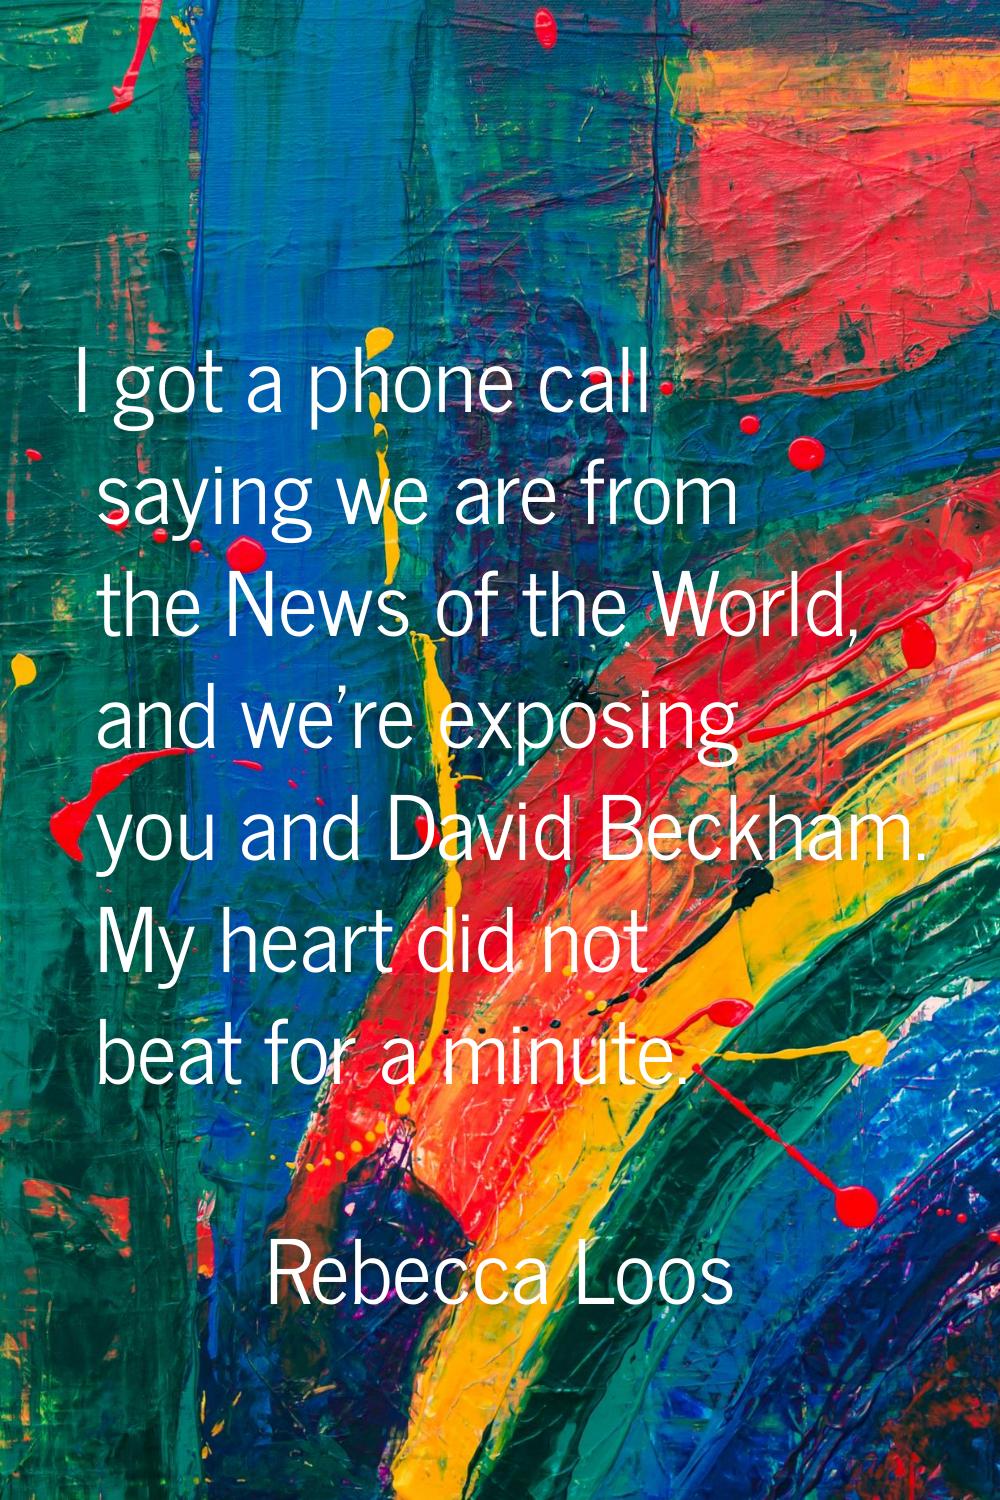 I got a phone call saying we are from the News of the World, and we're exposing you and David Beckh